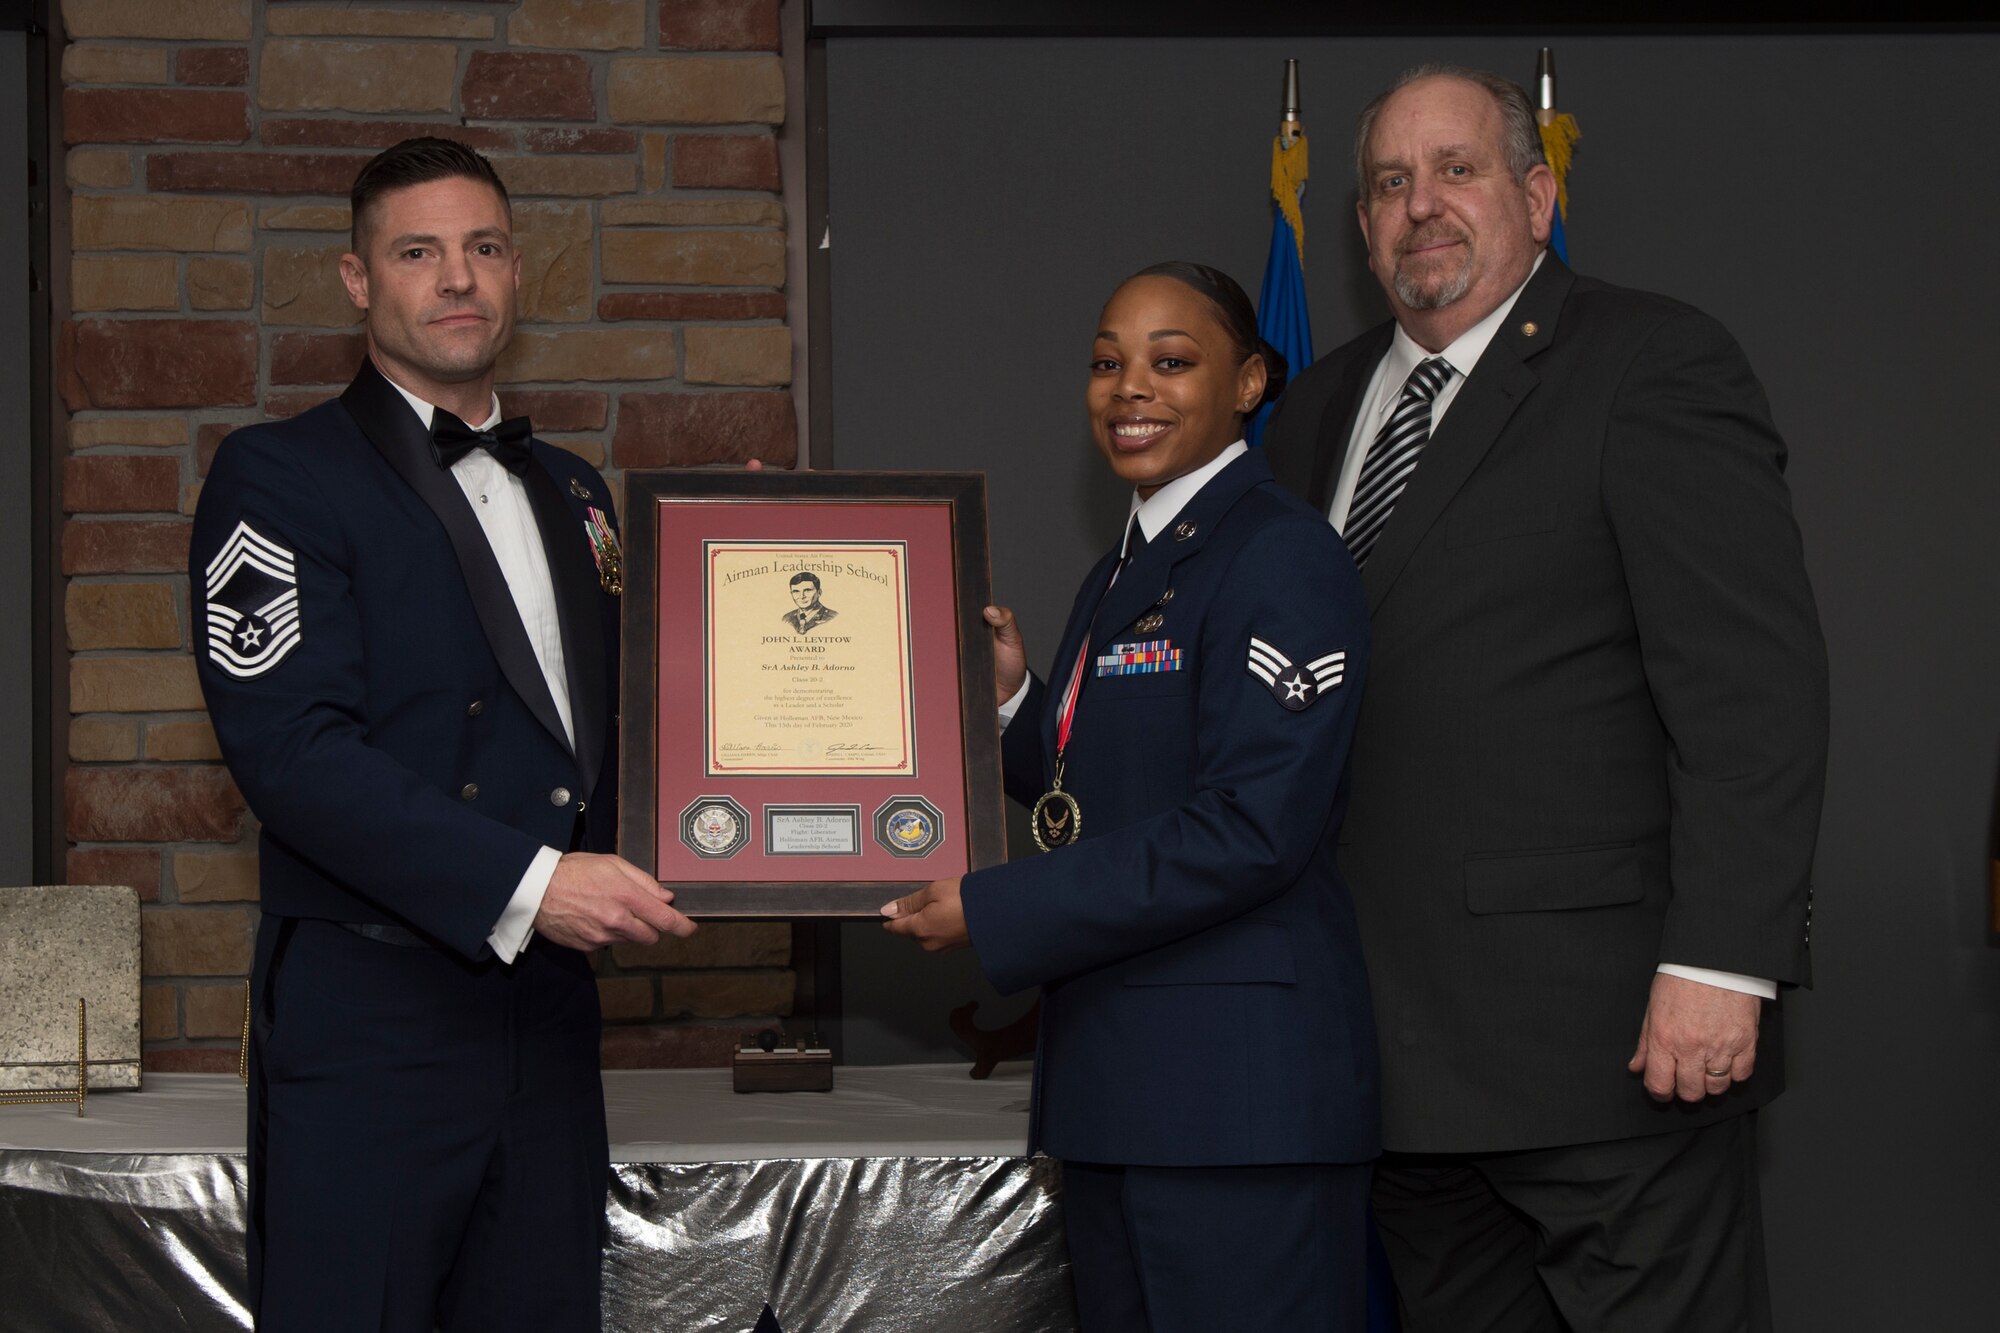 Senior Airman Ashley Adorno, Airman Leadership School graduate, accepts the John L. Levitow award during the graduation of ALS class 20-2, February 13, 2020, on Holloman Air Force Base, N.M. The John L. Levitow award is presented to the student demonstrating the highest level of leadership and scholastic performance, and is determined by the assignment of points by their peers. (U.S. Air Force photo by Airman 1st Class Kristin Weathersby).